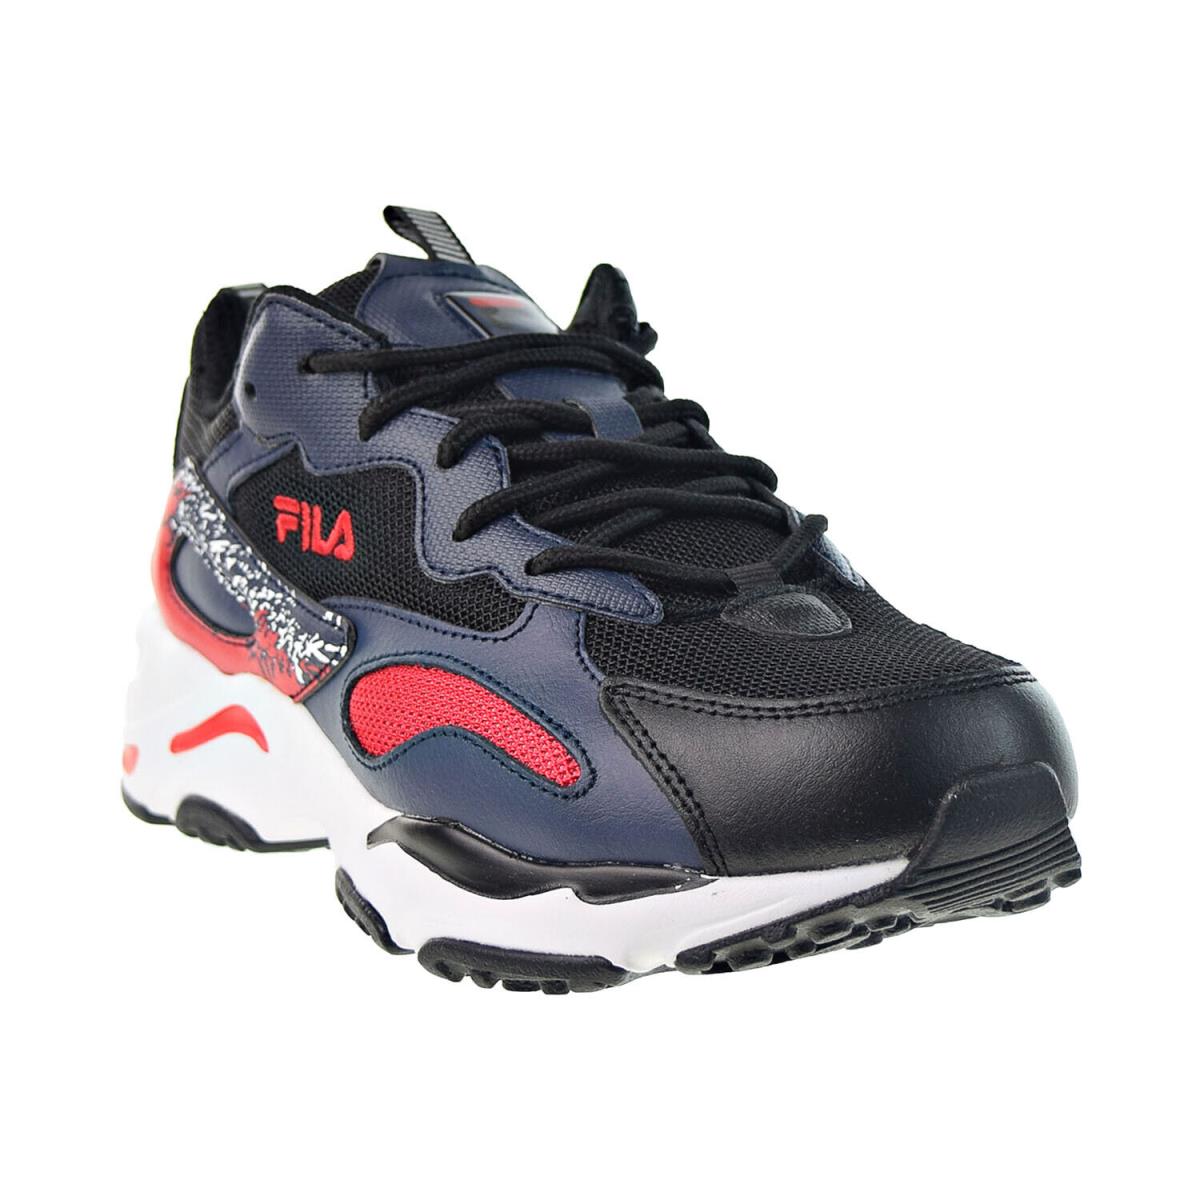 Fila Ray Tracer TR 2 Men`s Shoes Black-white-blue-red 1RM01230-018